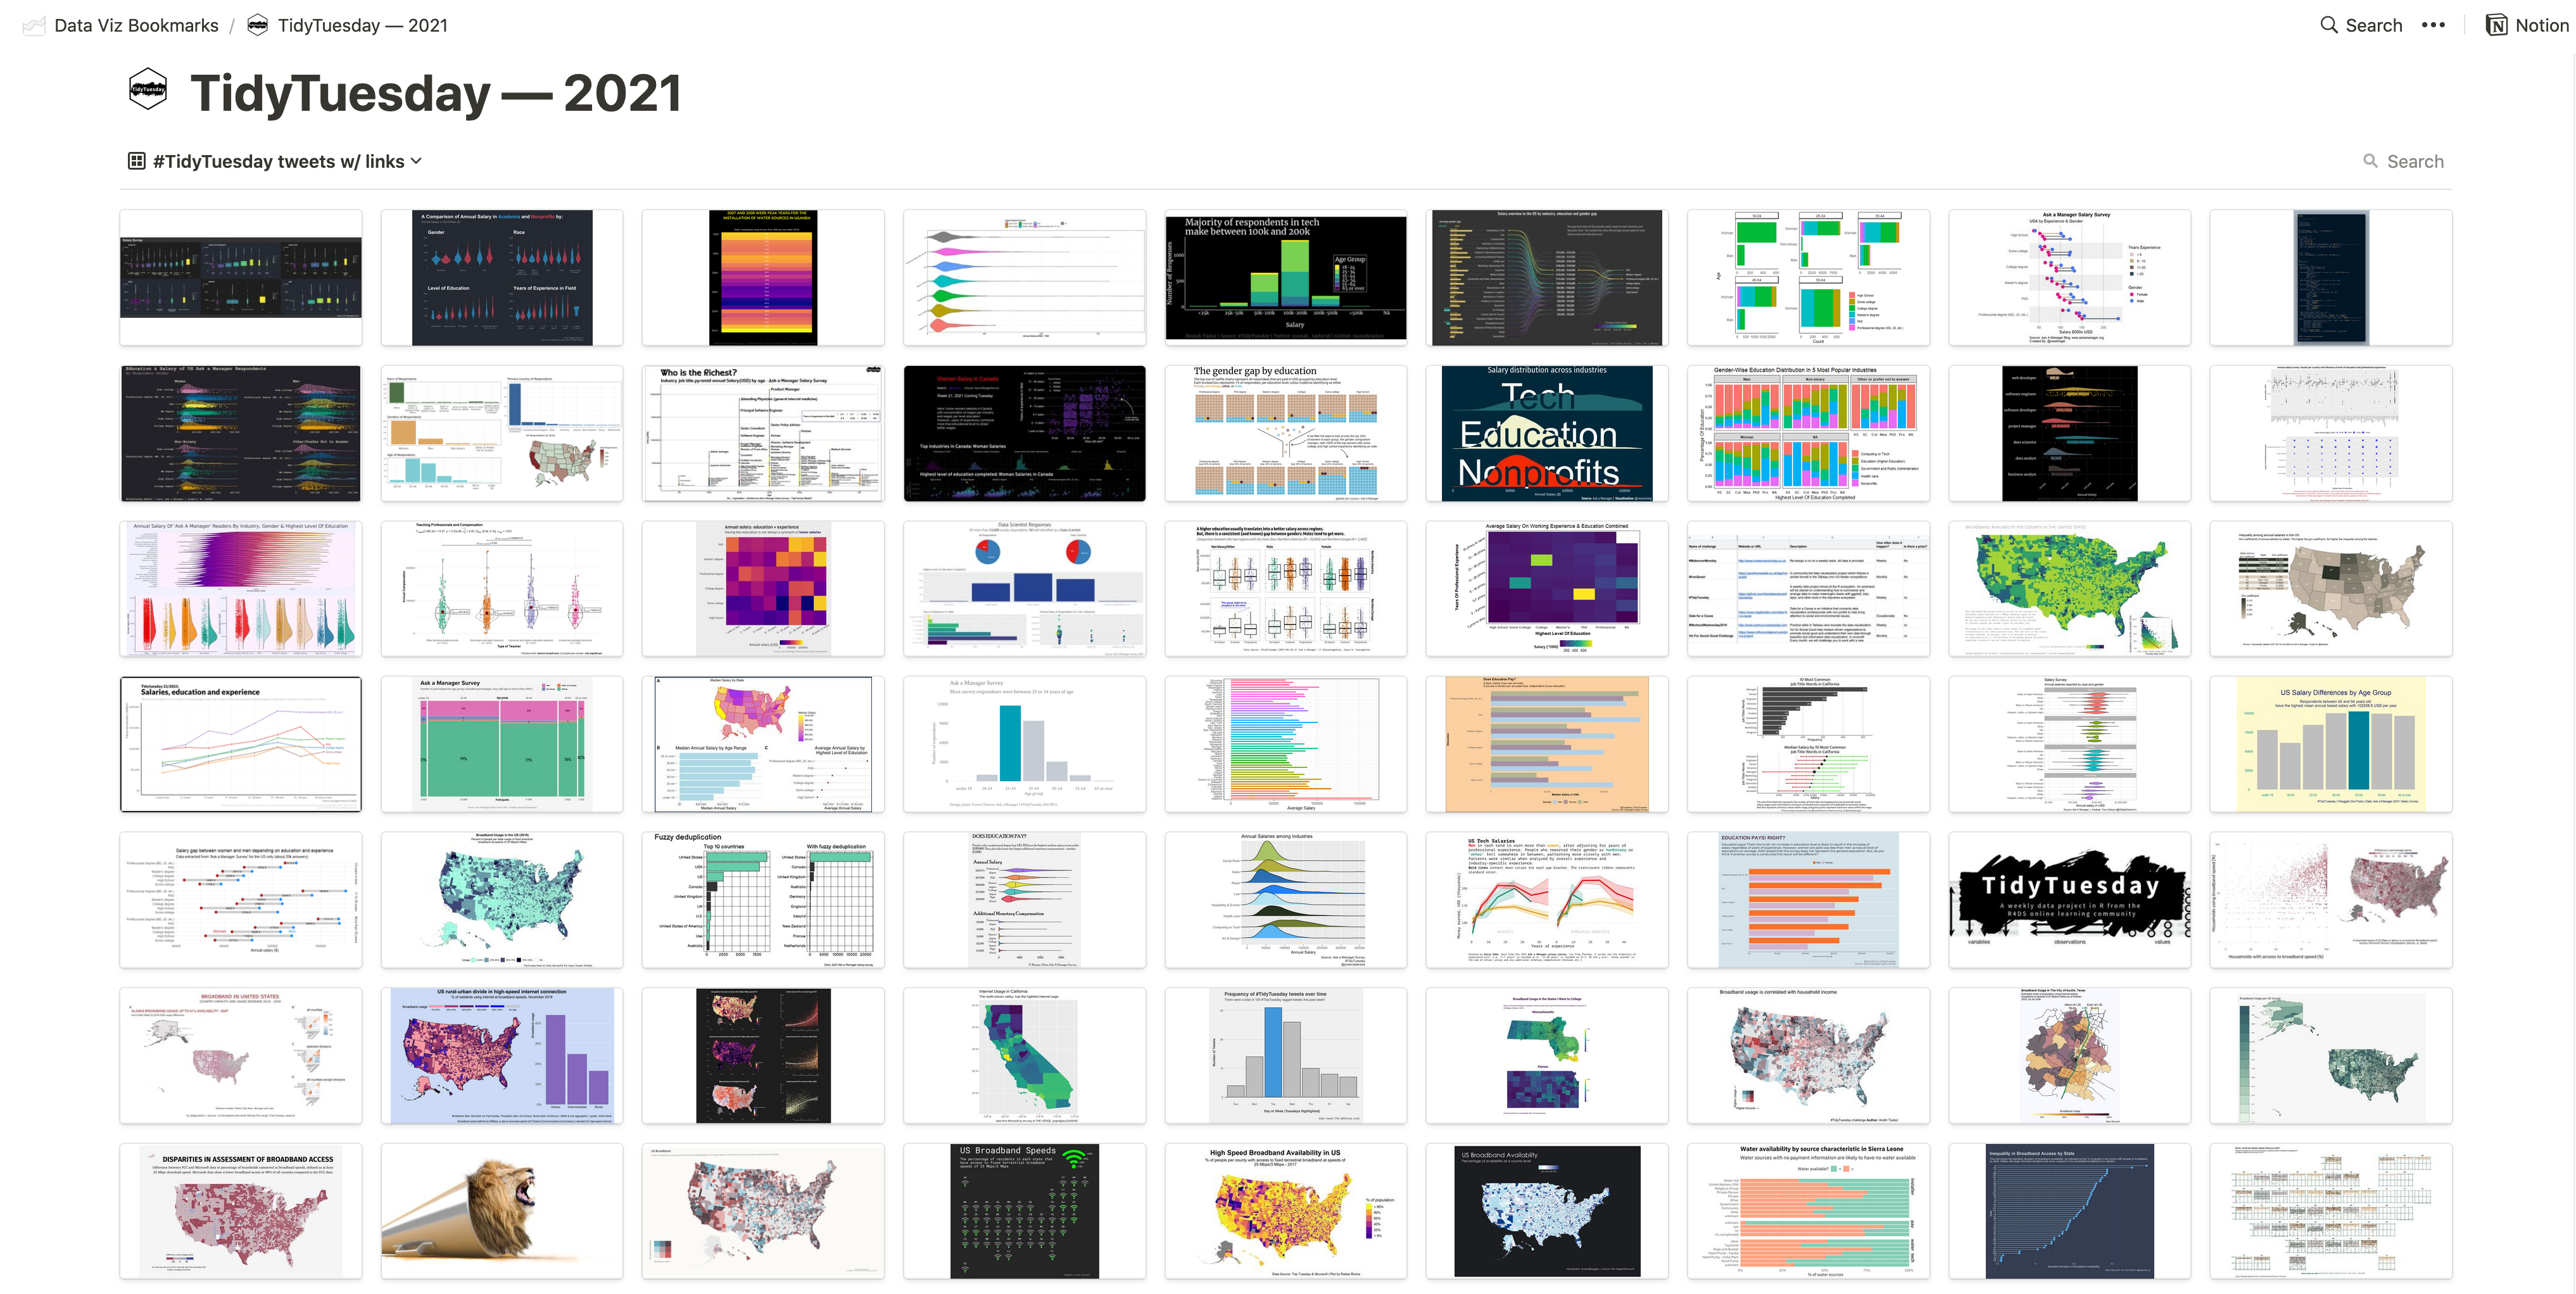 The Notion 2021 TidyTuesday database showing a gallery of the most recent data visualizations in the collection, organized in a grid